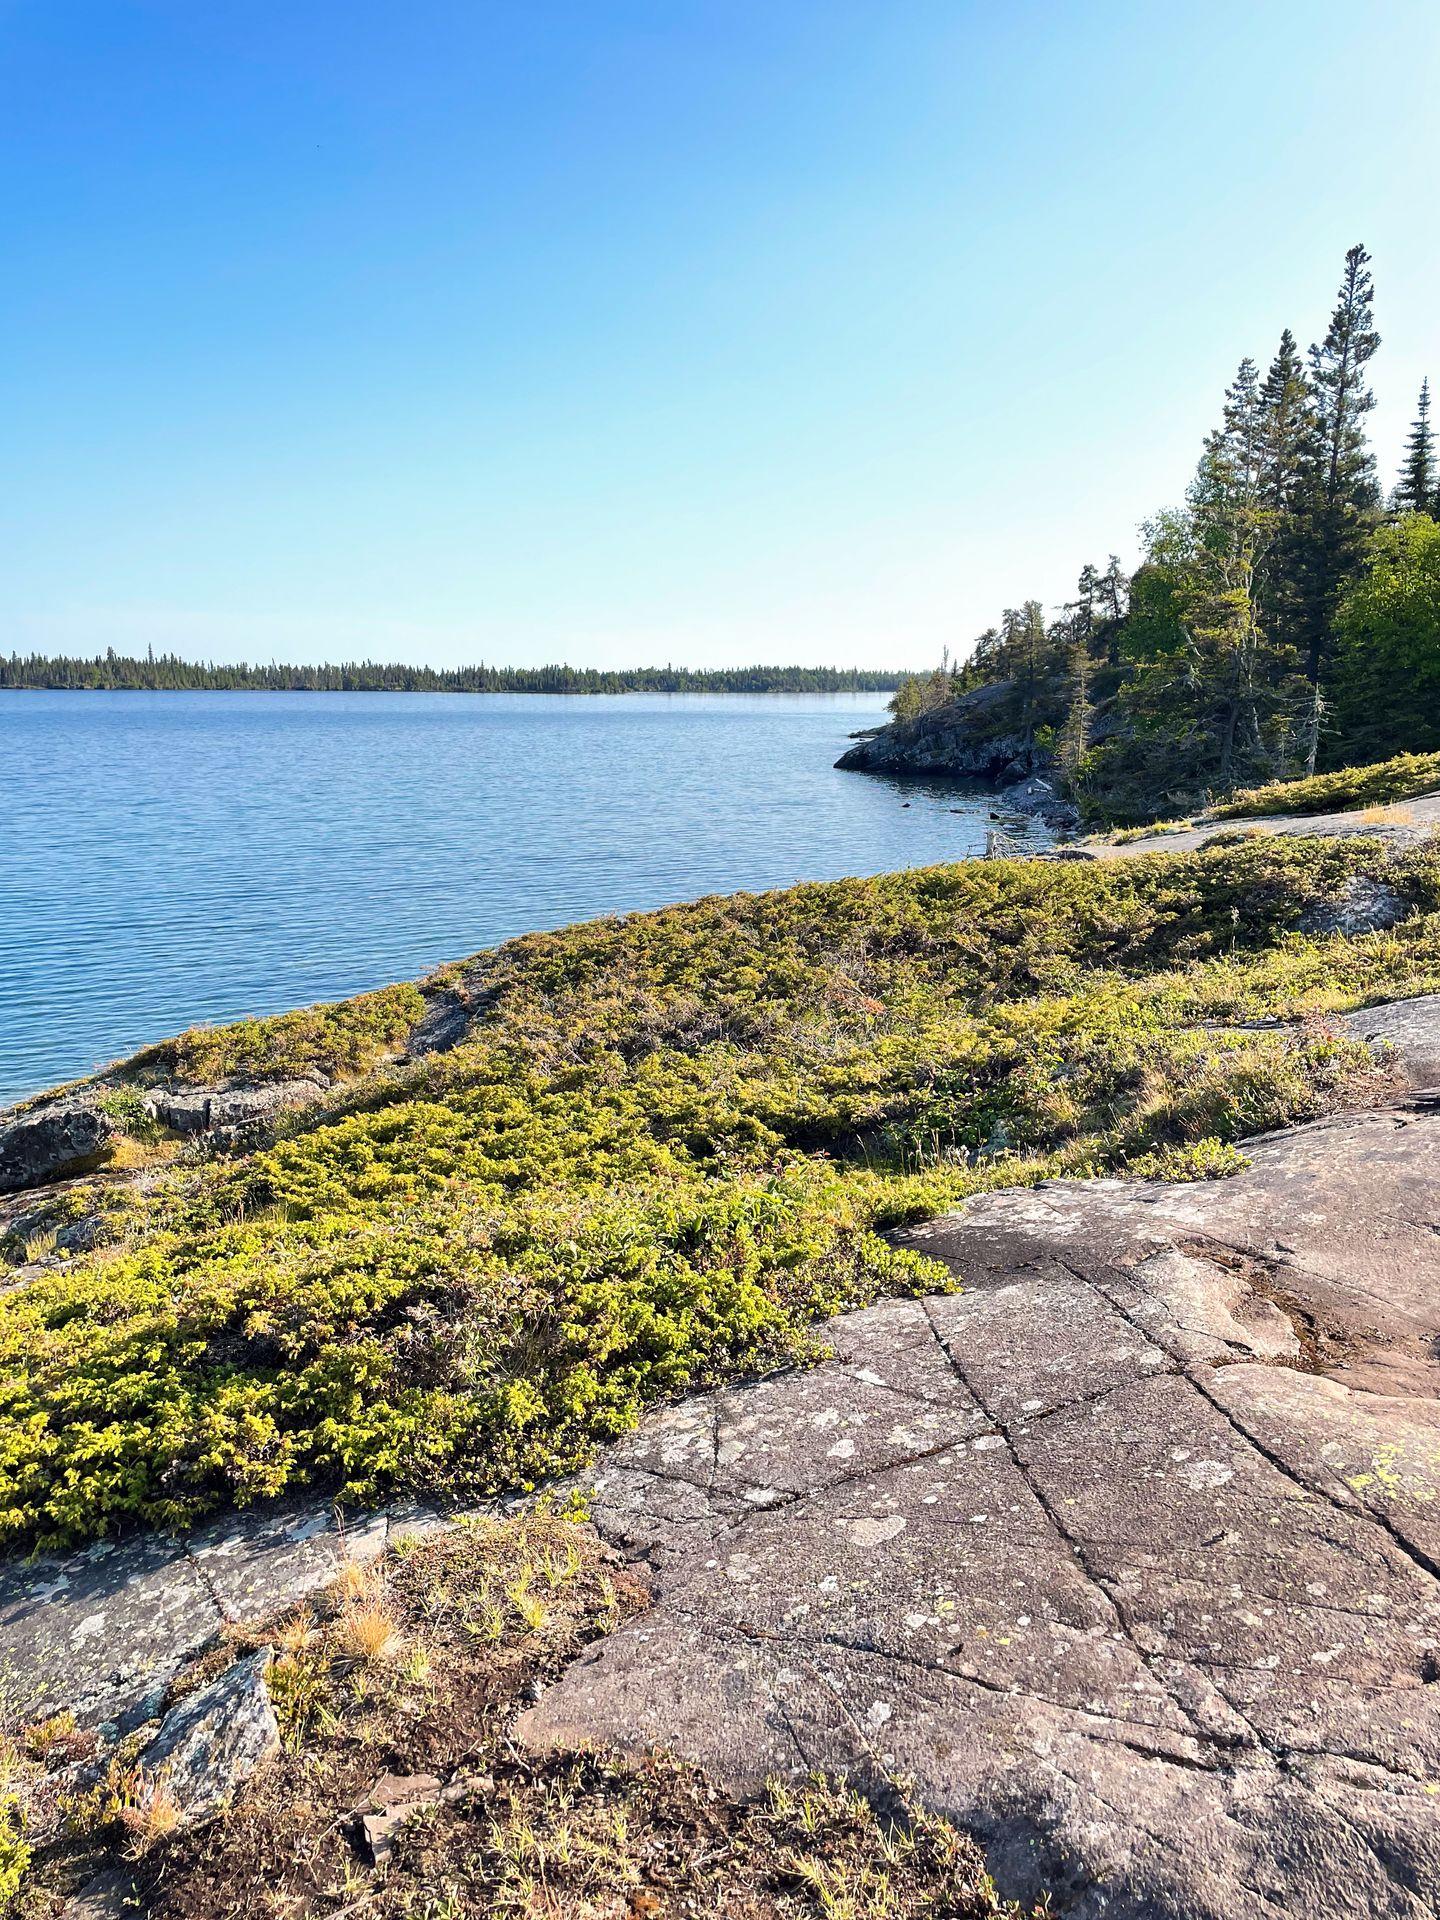 A rocky path and some greenery seen while hiking in Isle Royale